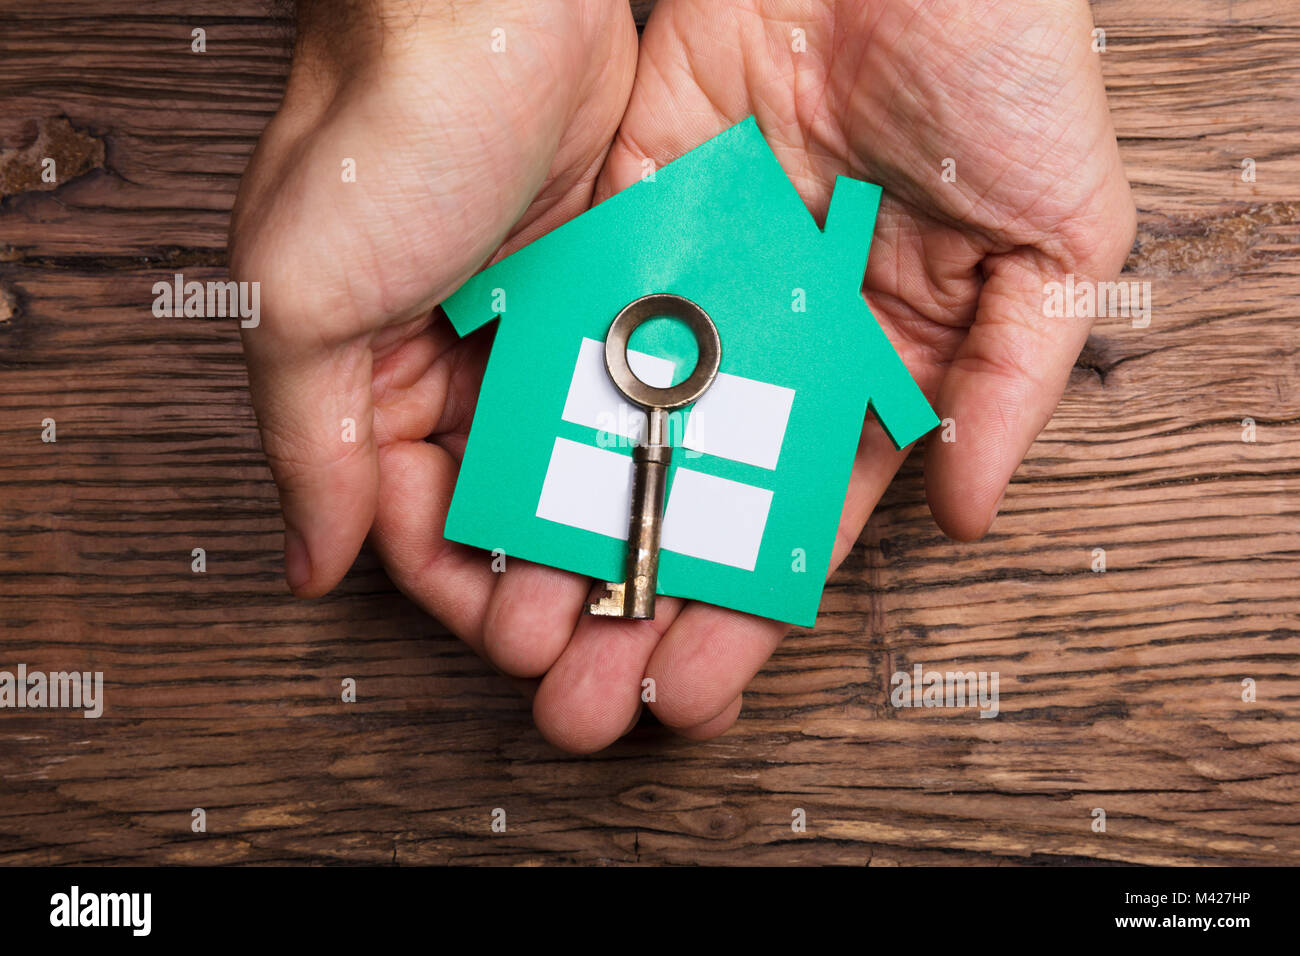 High Angle View Of Hands Holding Paper House With House Key Against Wooden Table Stock Photo